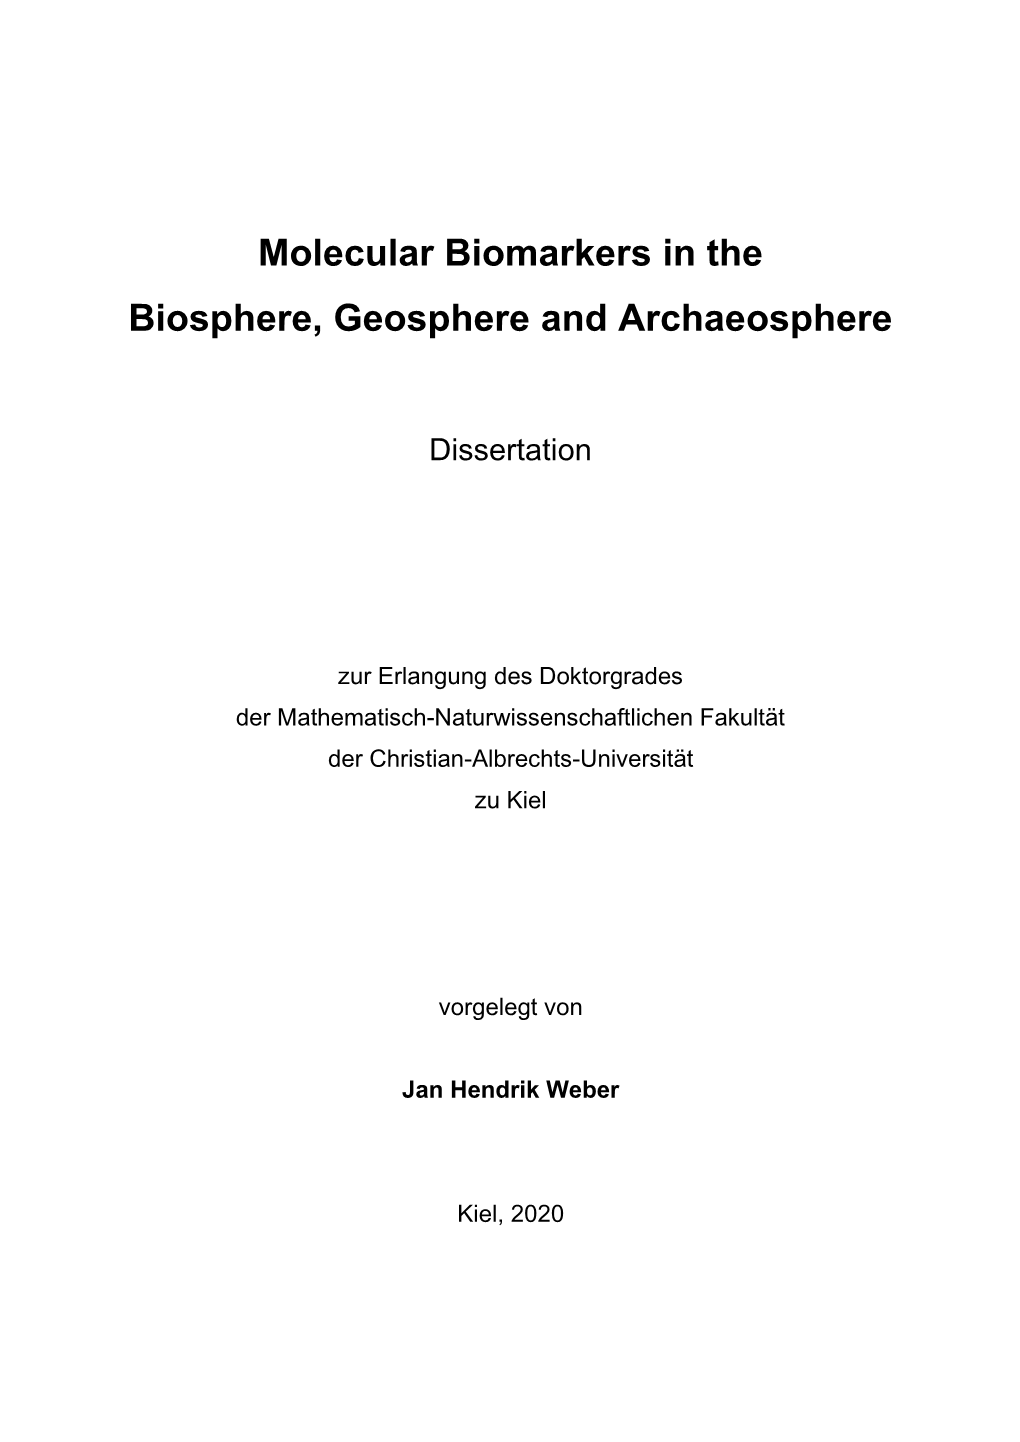 Molecular Biomarkers in the Biosphere, Geosphere and Archaeosphere